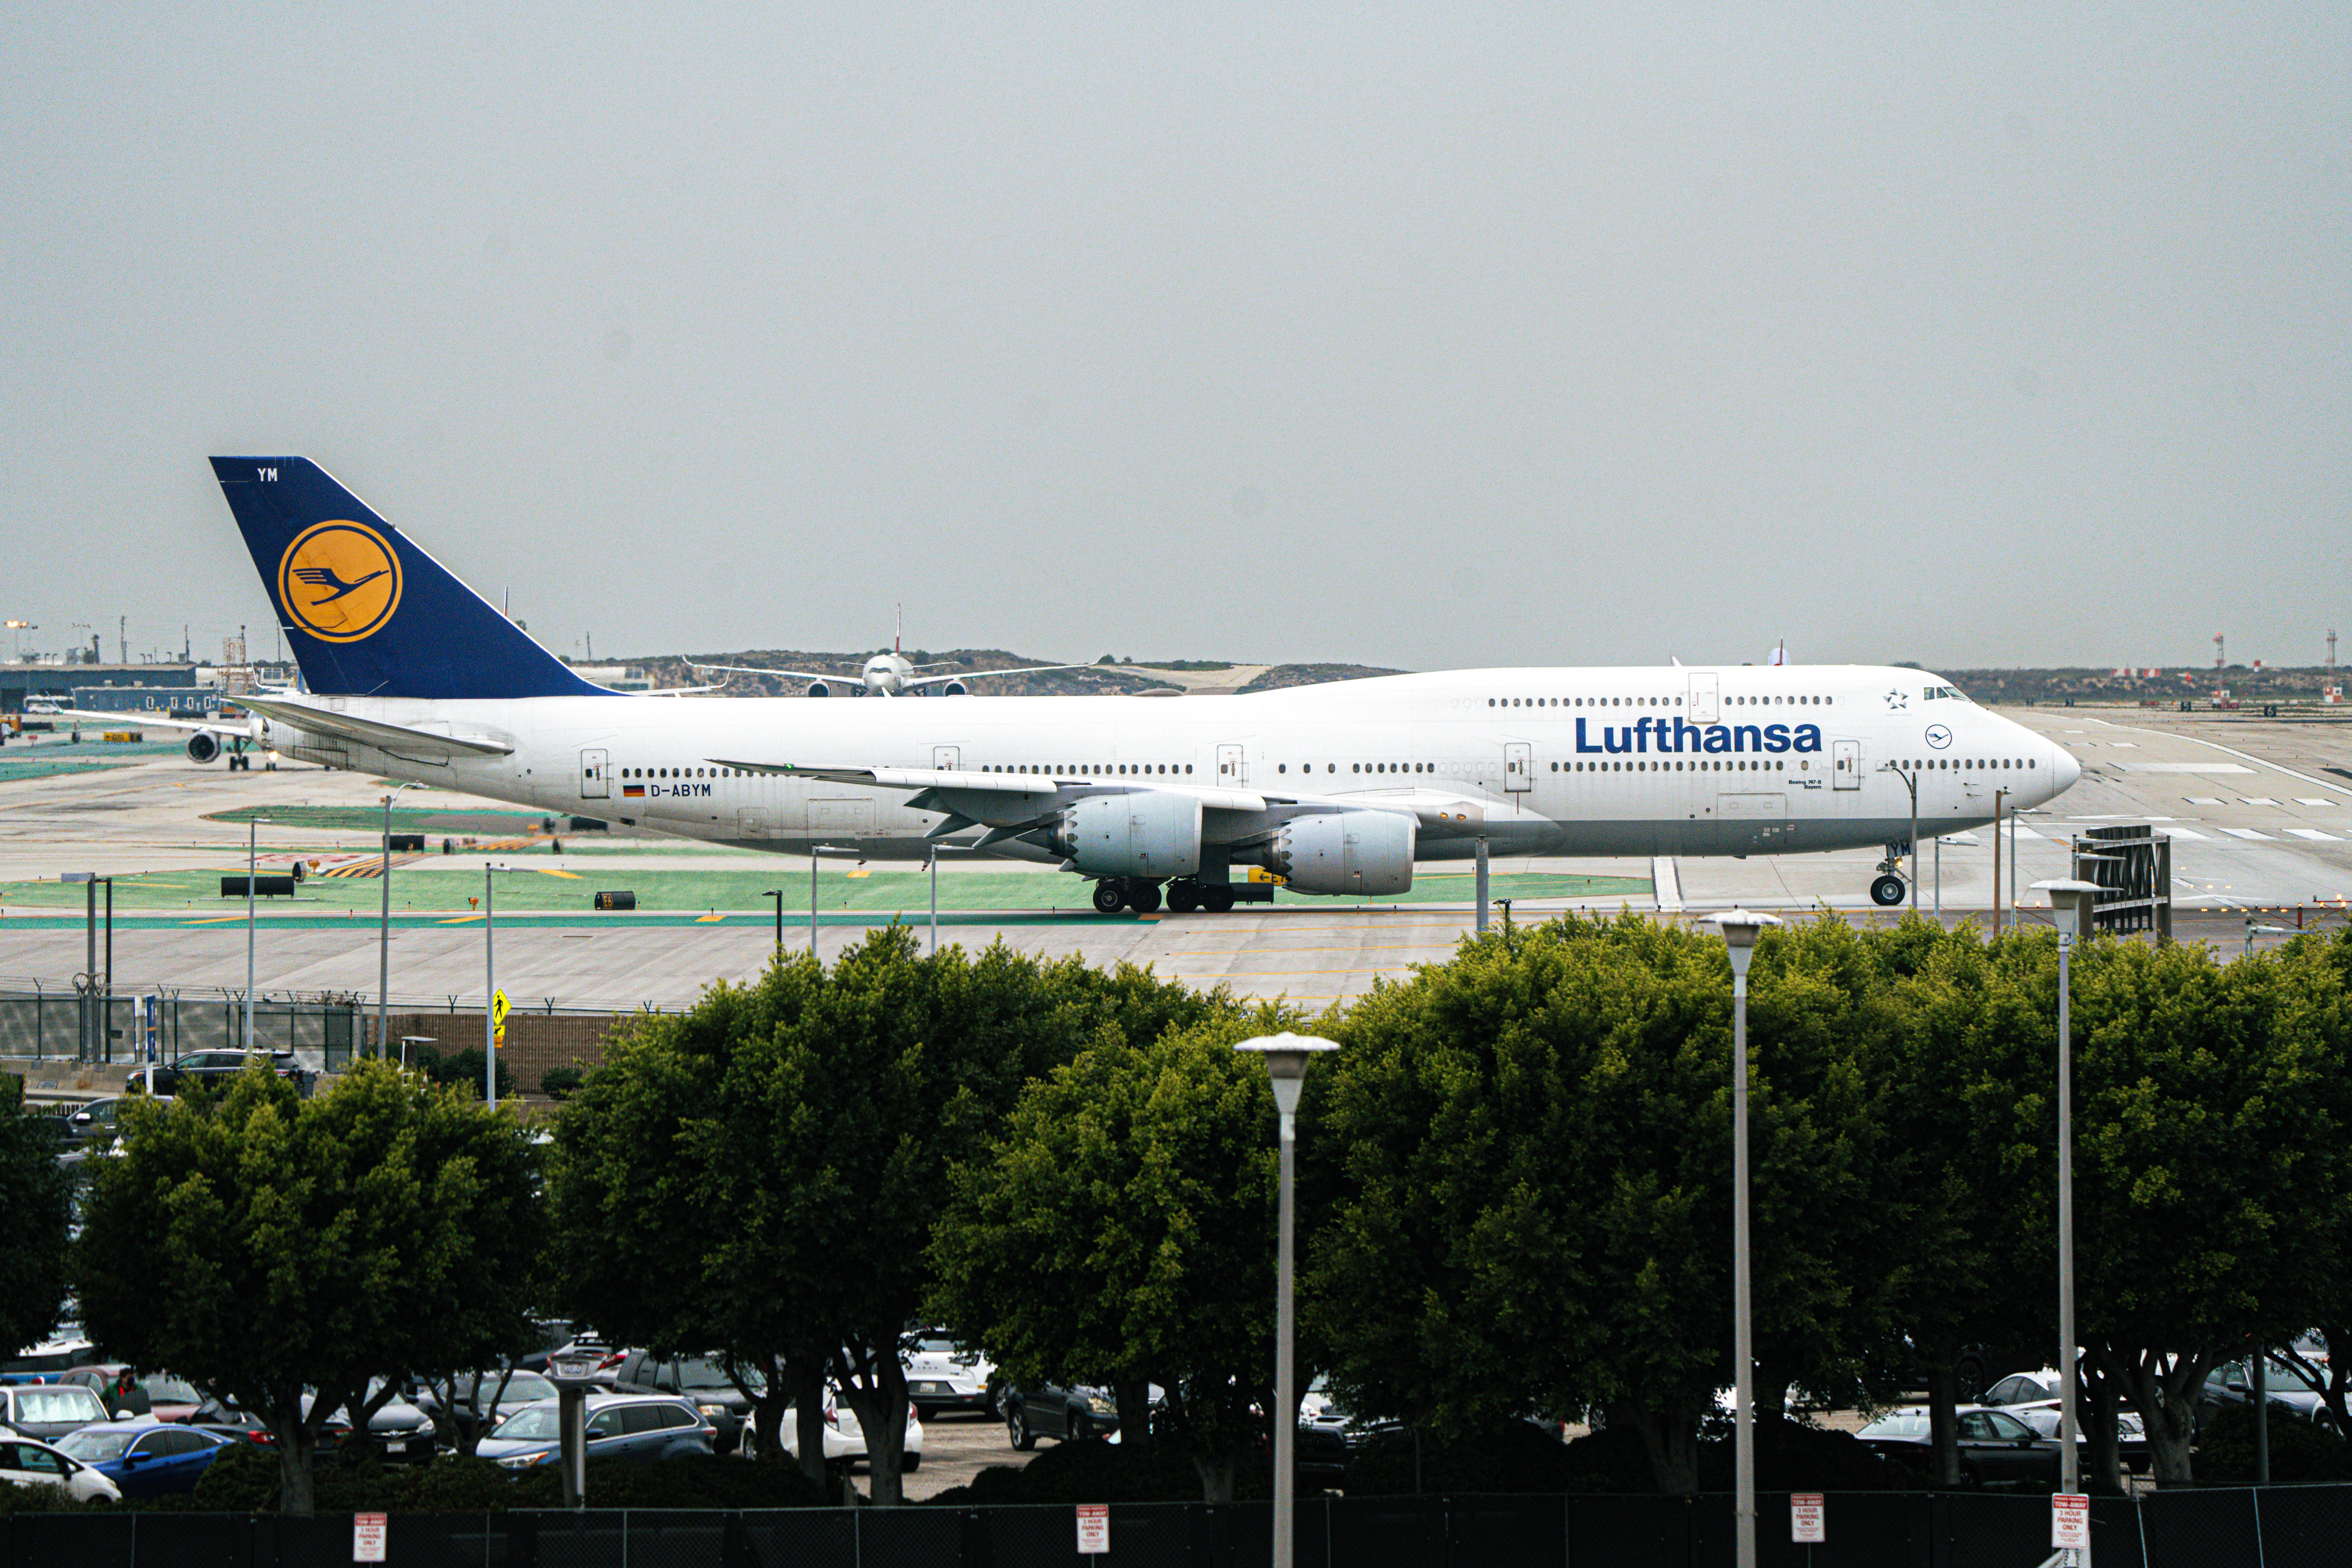 Lufthansa Boeing 747-8 taxiing at LAX